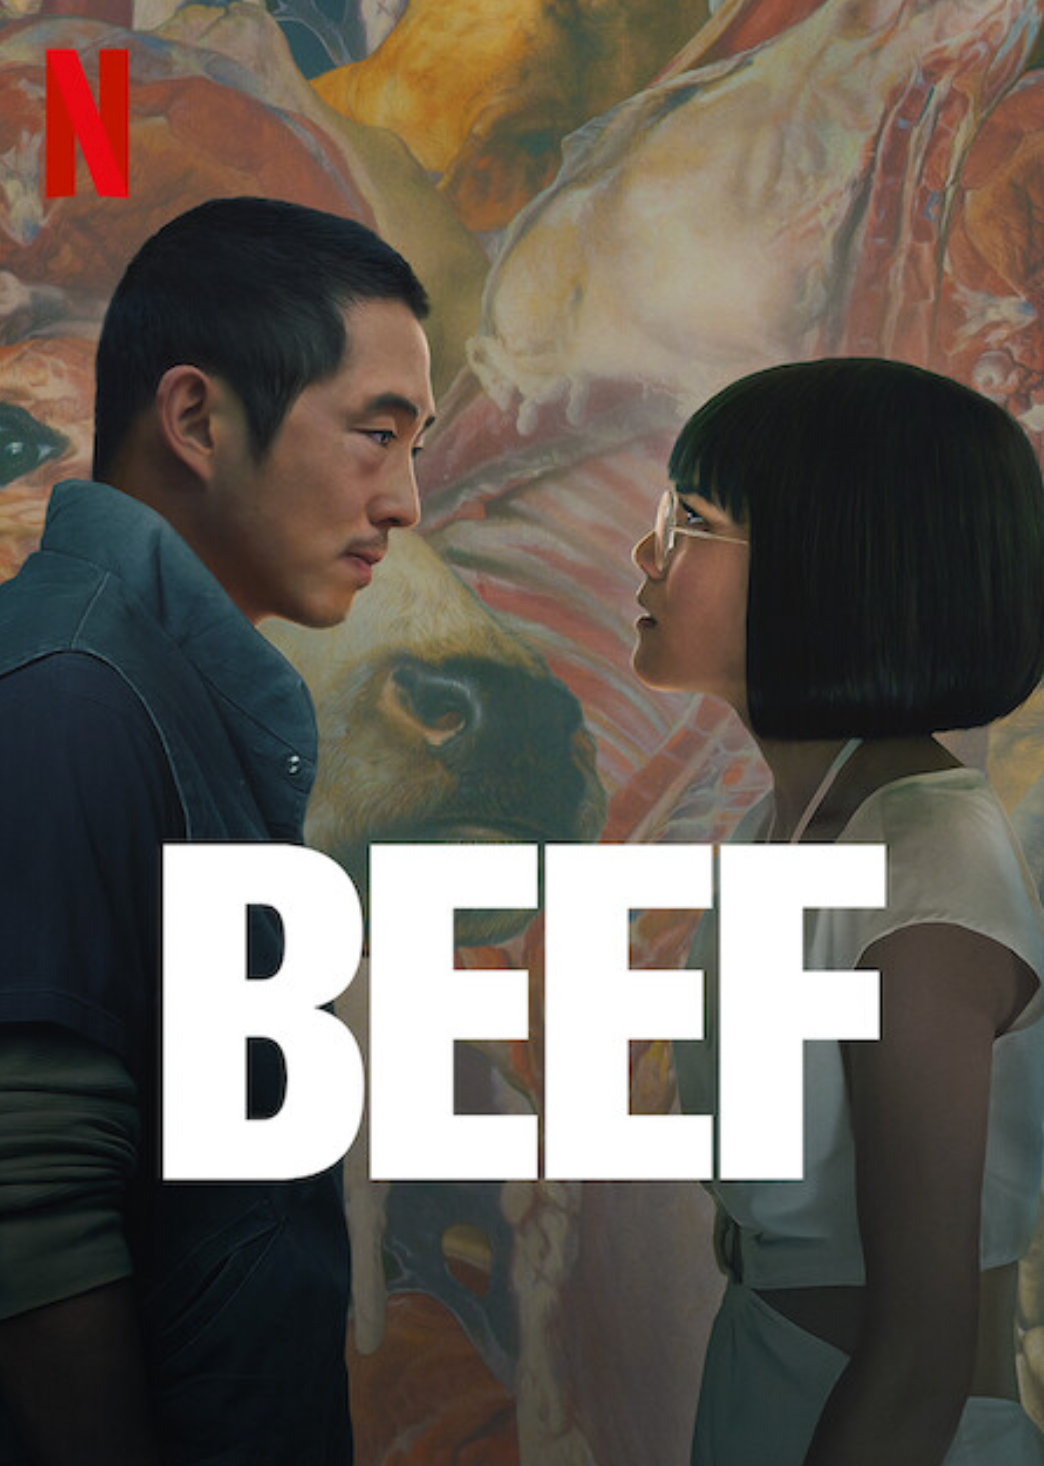 Have you seen 'Beef' on Netflix? It's about anger, emptiness, and the meaning of life, all made in America.